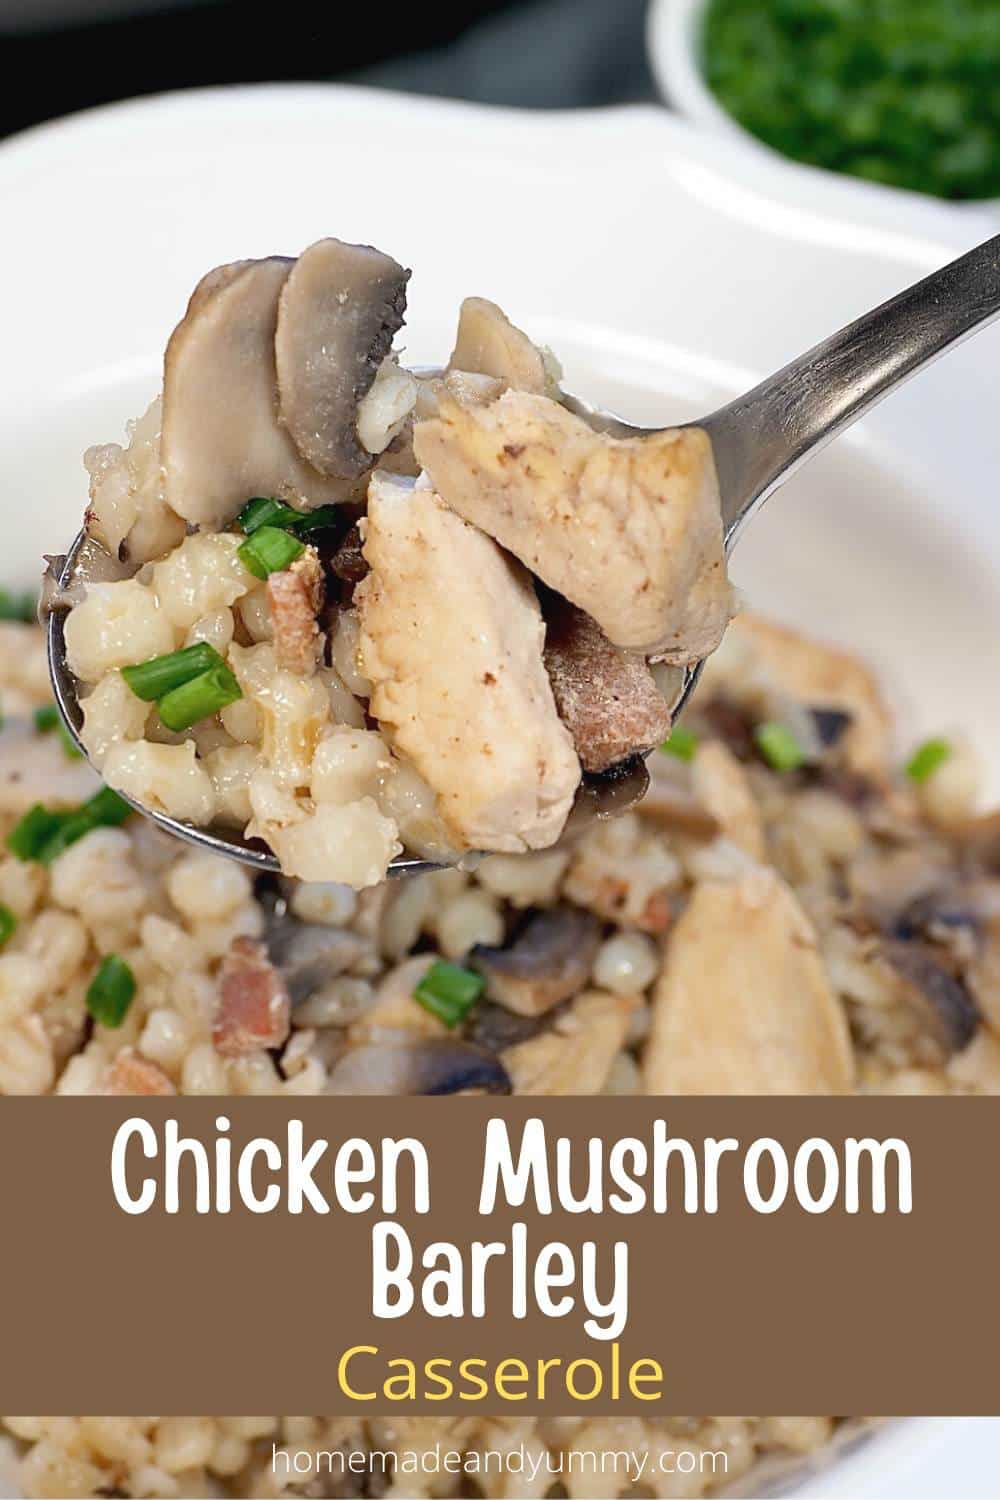 A spoonful of baked casserole with chicken, barley and mushrooms.